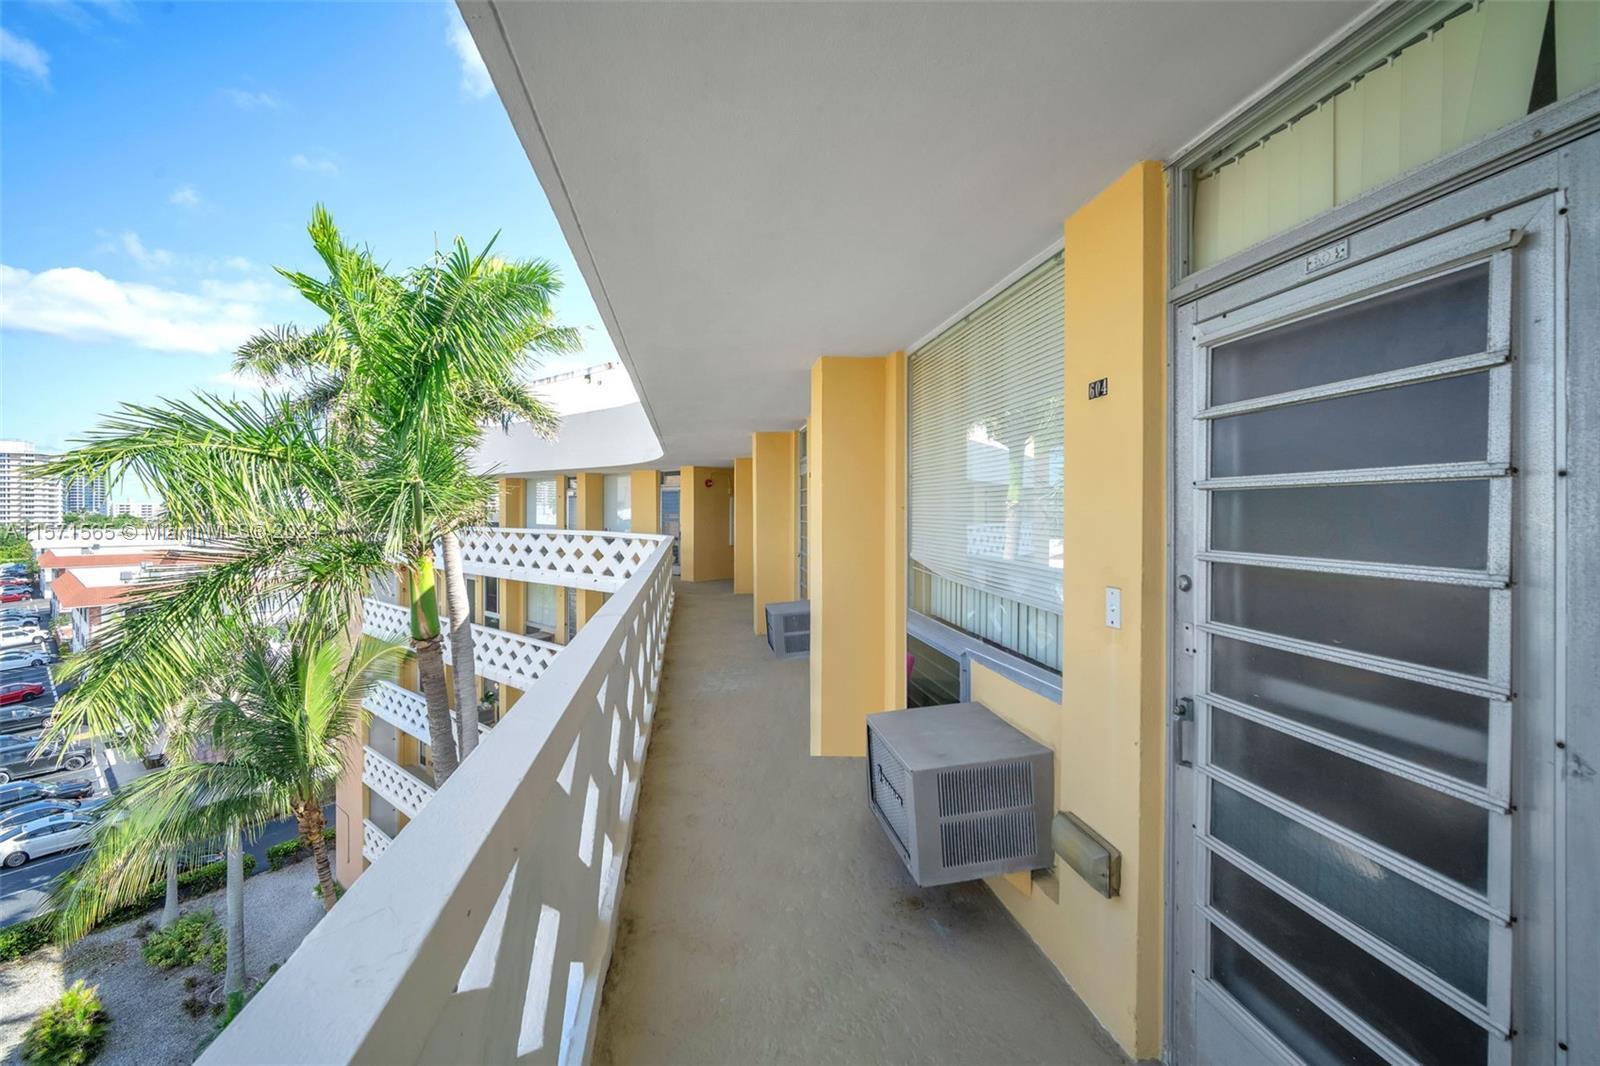 Photo of 2400 NE 9th St #604 in Fort Lauderdale, FL